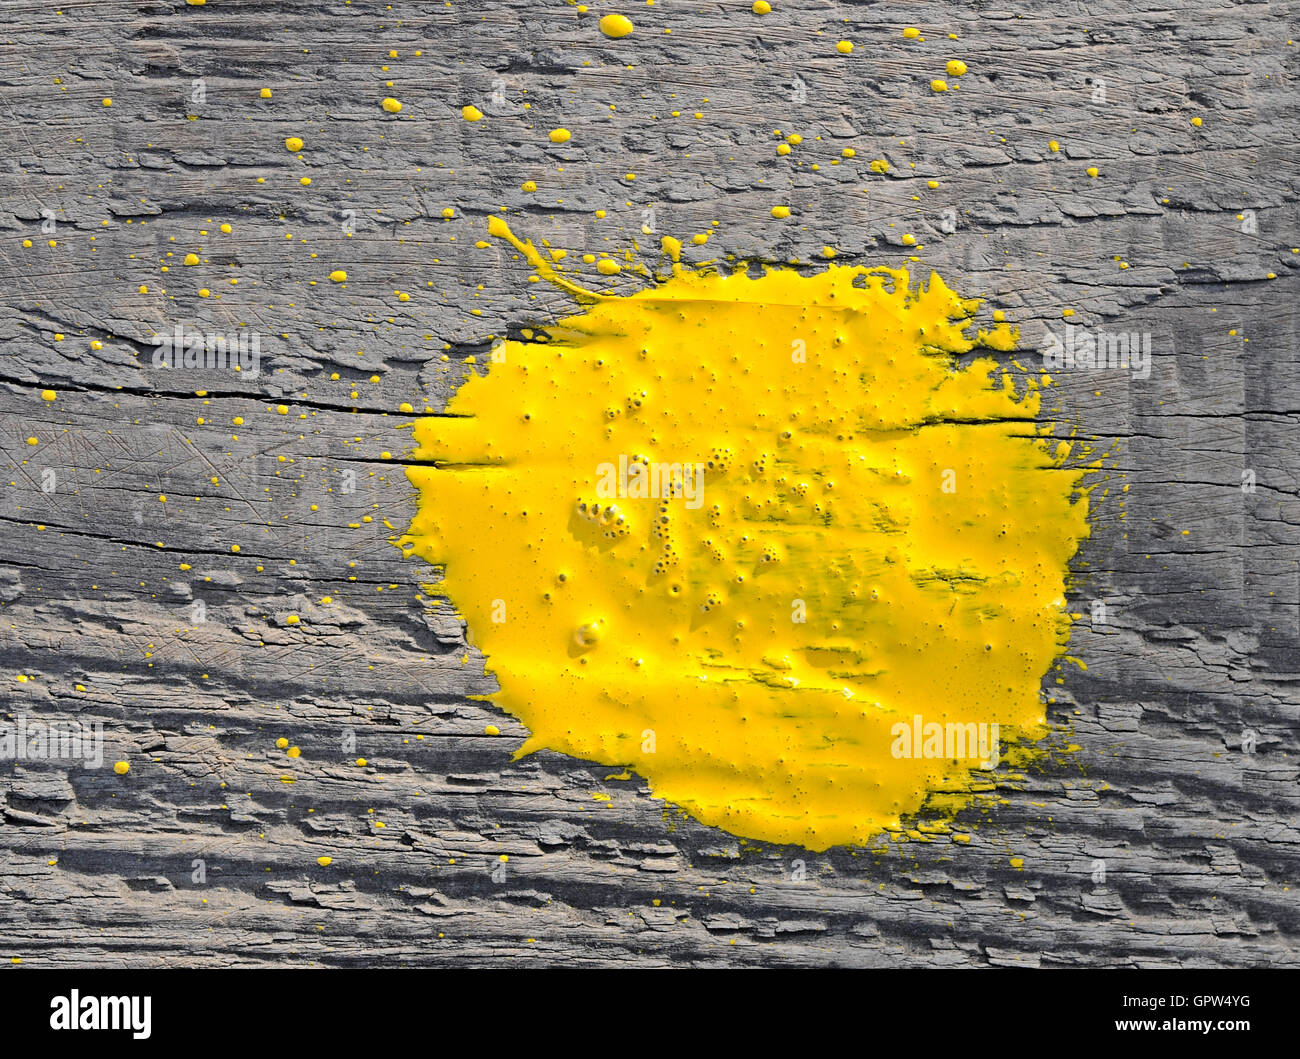 Yellow paint splashed over old wooden background Stock Photo